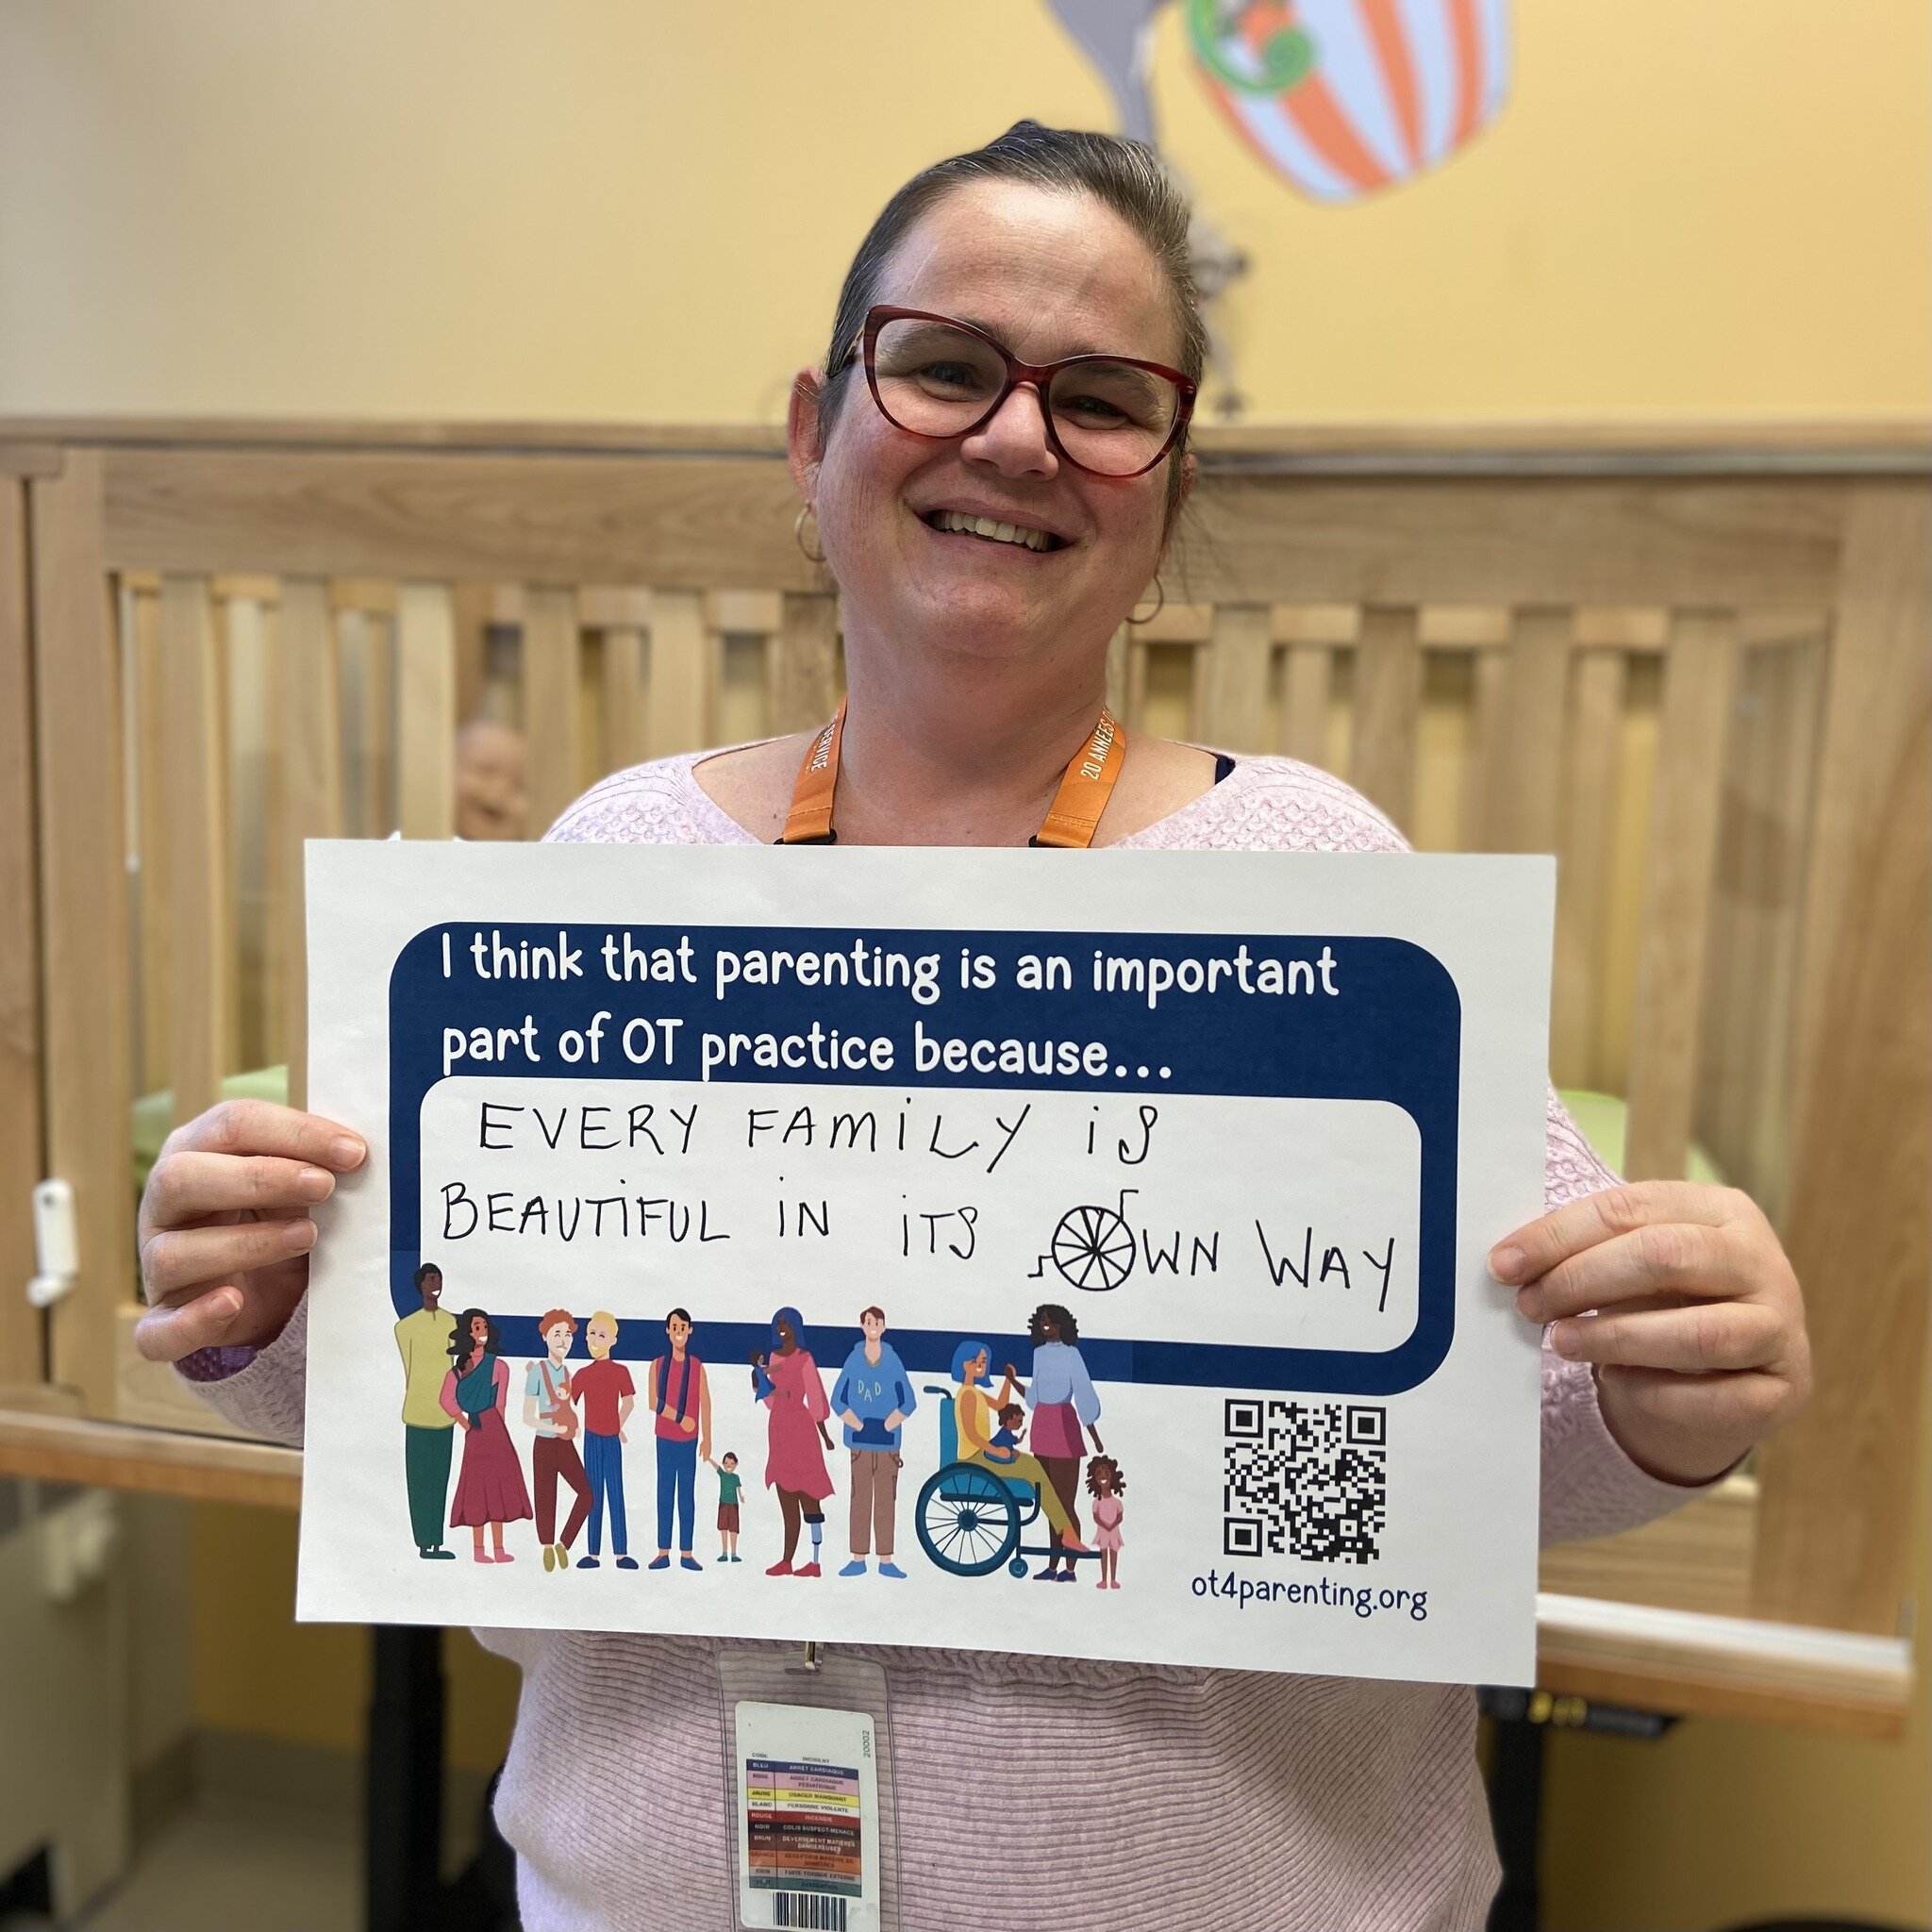 Nathalie is an OT at the Parents Plus Clinic of the Centre de r&eacute;adaptation en d&eacute;ficience physique Lucie-Bruneau and she thinks that parenting is an important part of OT practice because... &quot;every family is beautiful in its own way&